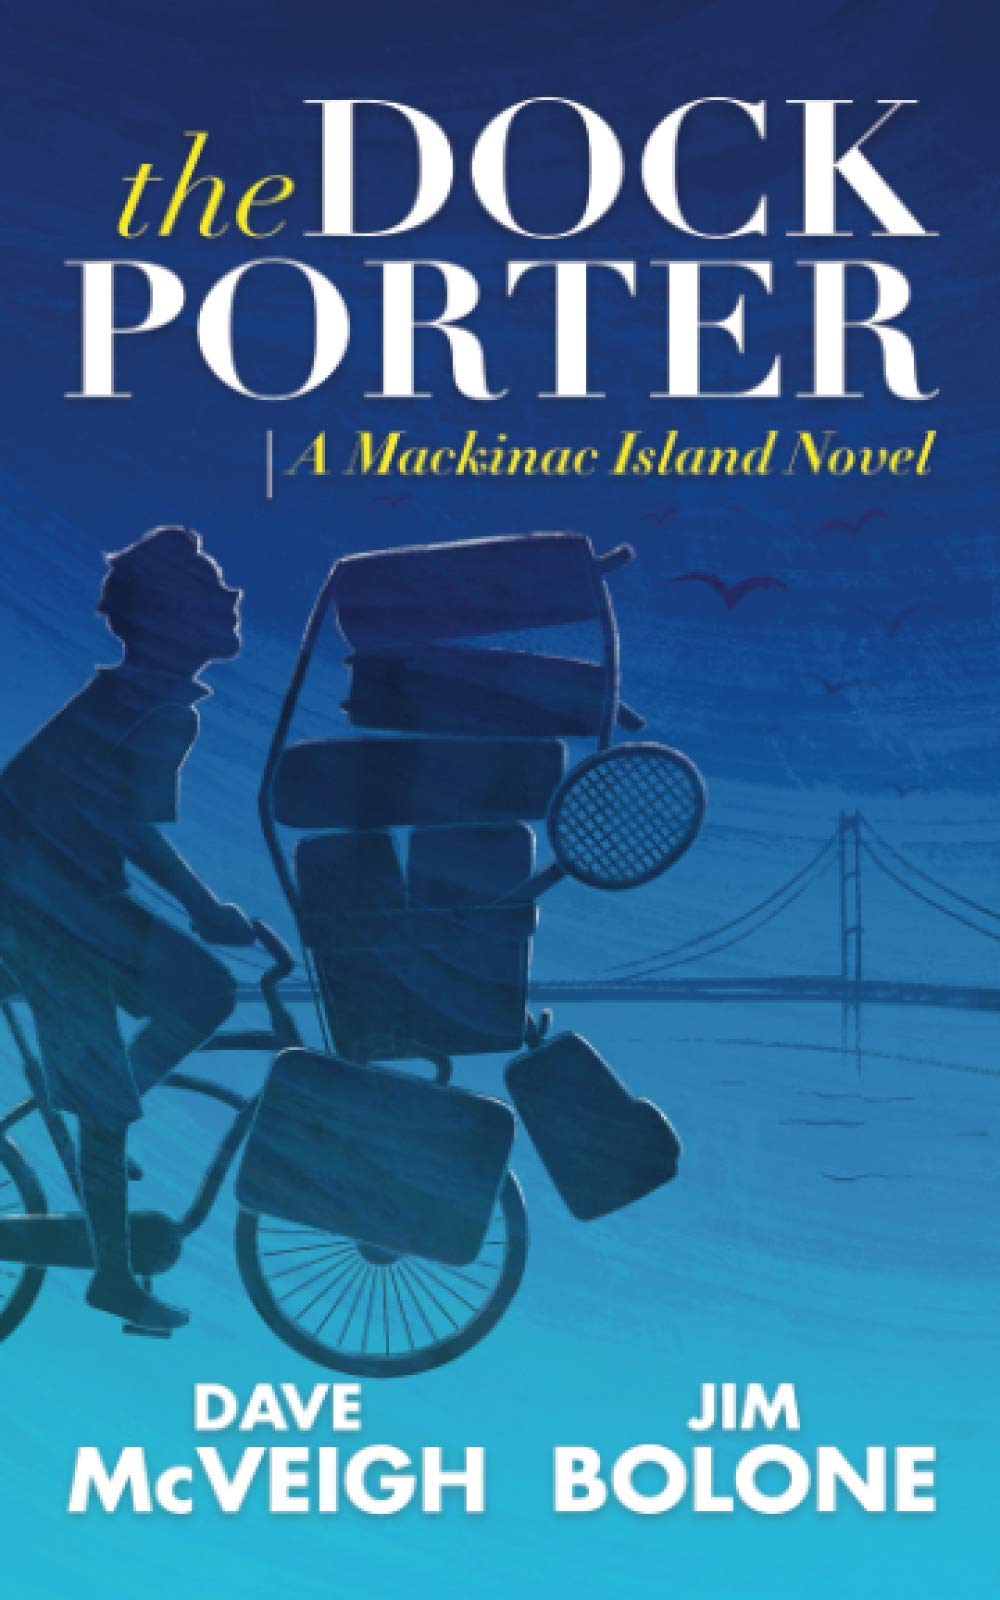 Image for "The Dockporter"